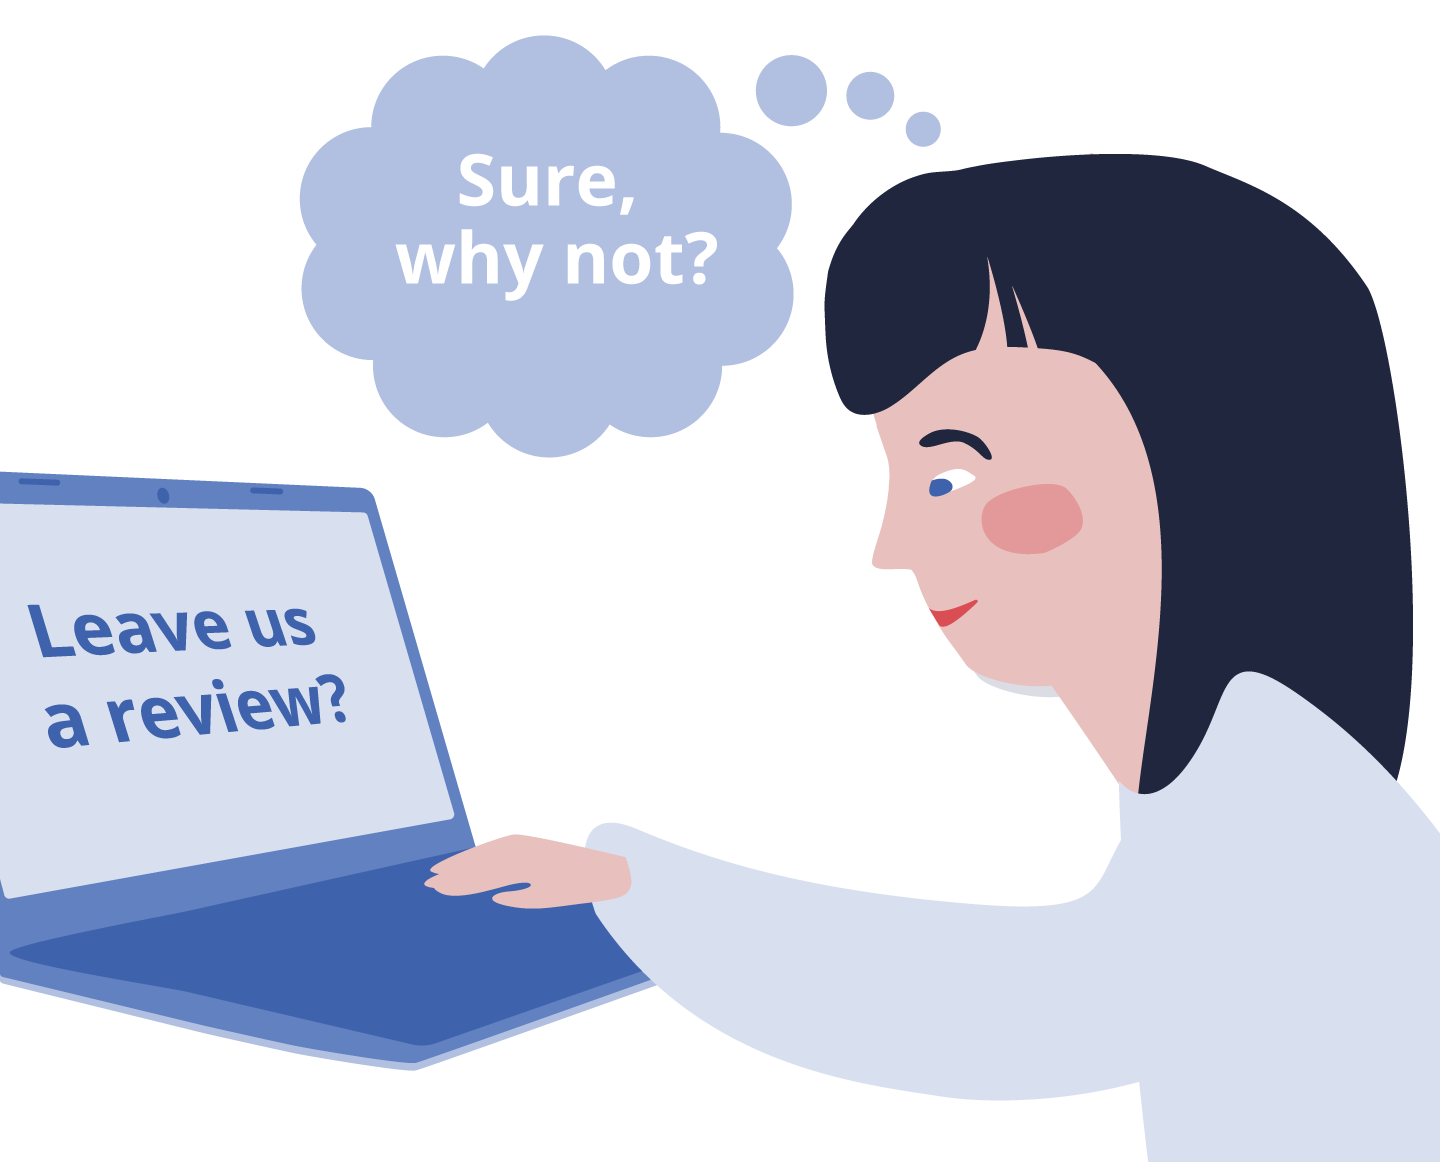 Woman asked to leave an online review and she's thinking, "Sure why not?"